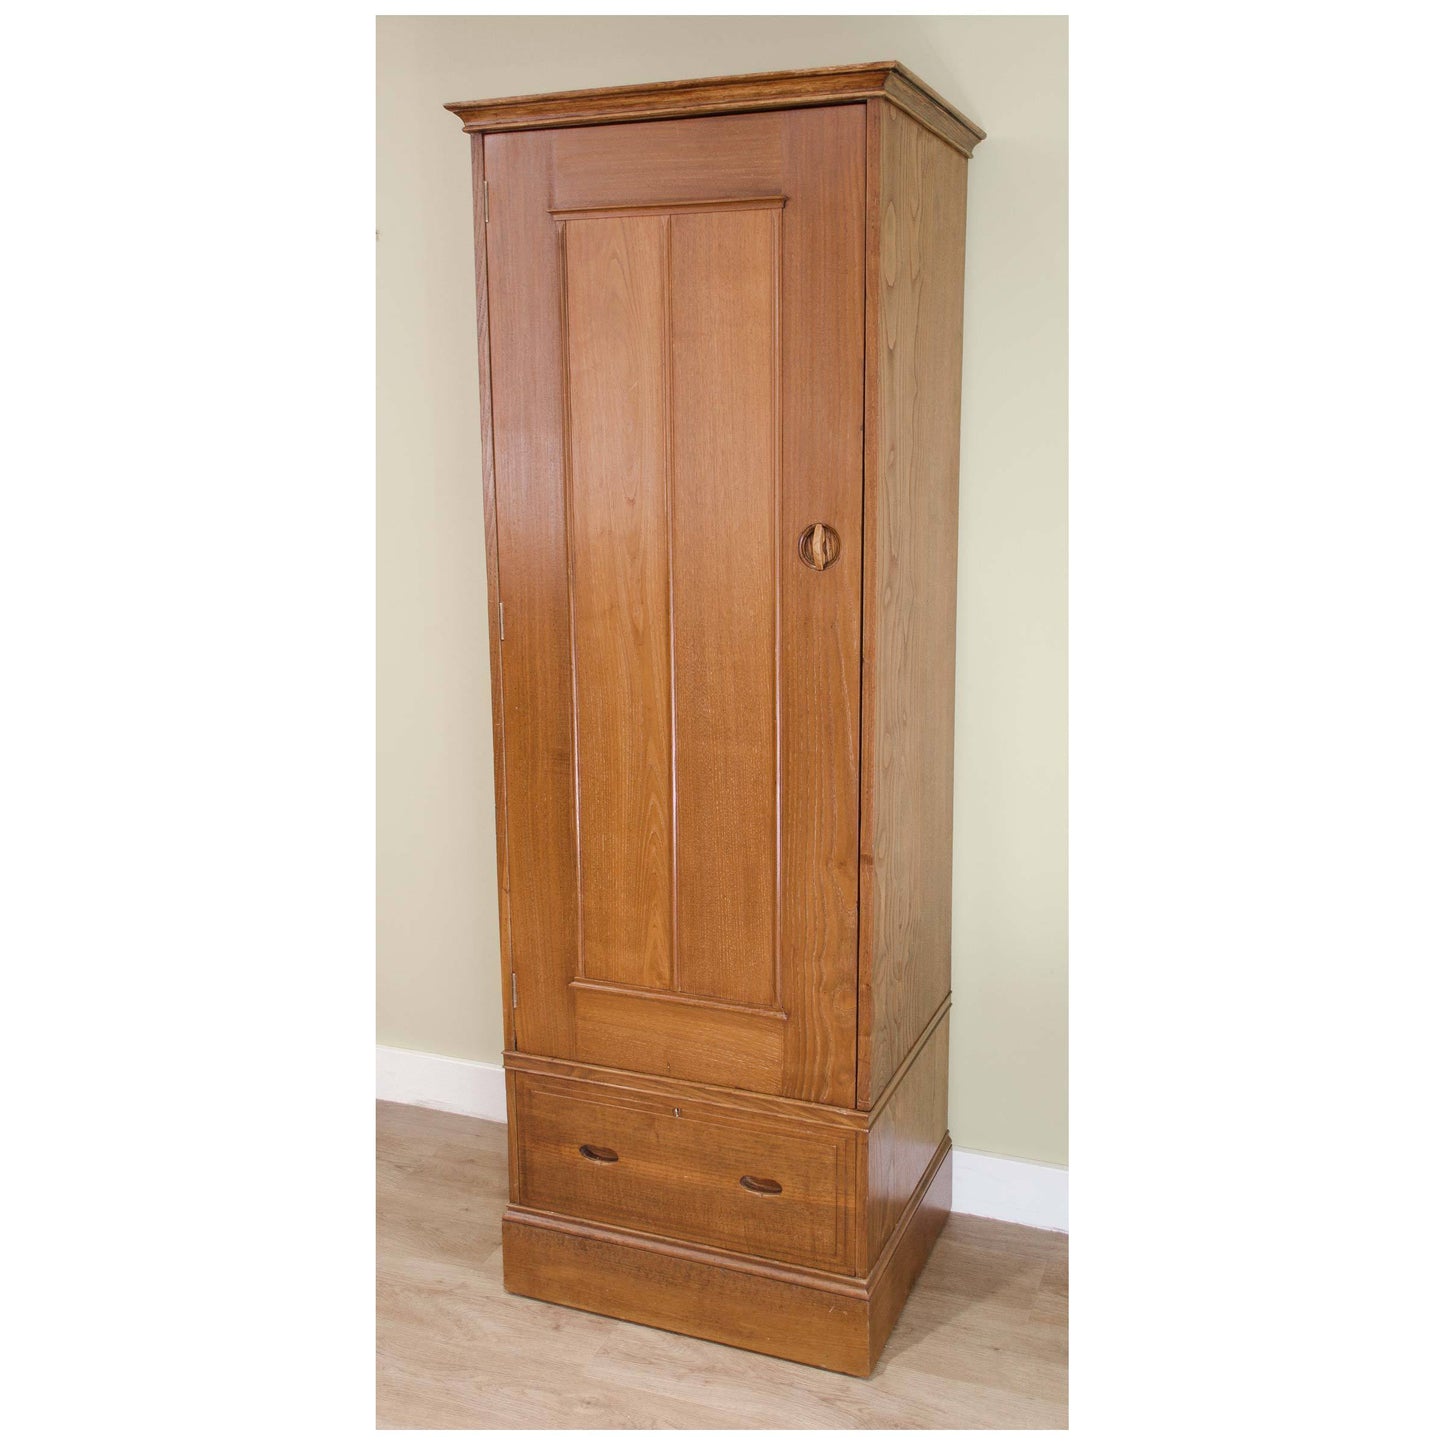 Heal and Co (Ambrose Heal) Ambrose Heal Rare Arts and Crafts Sweet Chestnut Single Door Wardrobe C. 1905